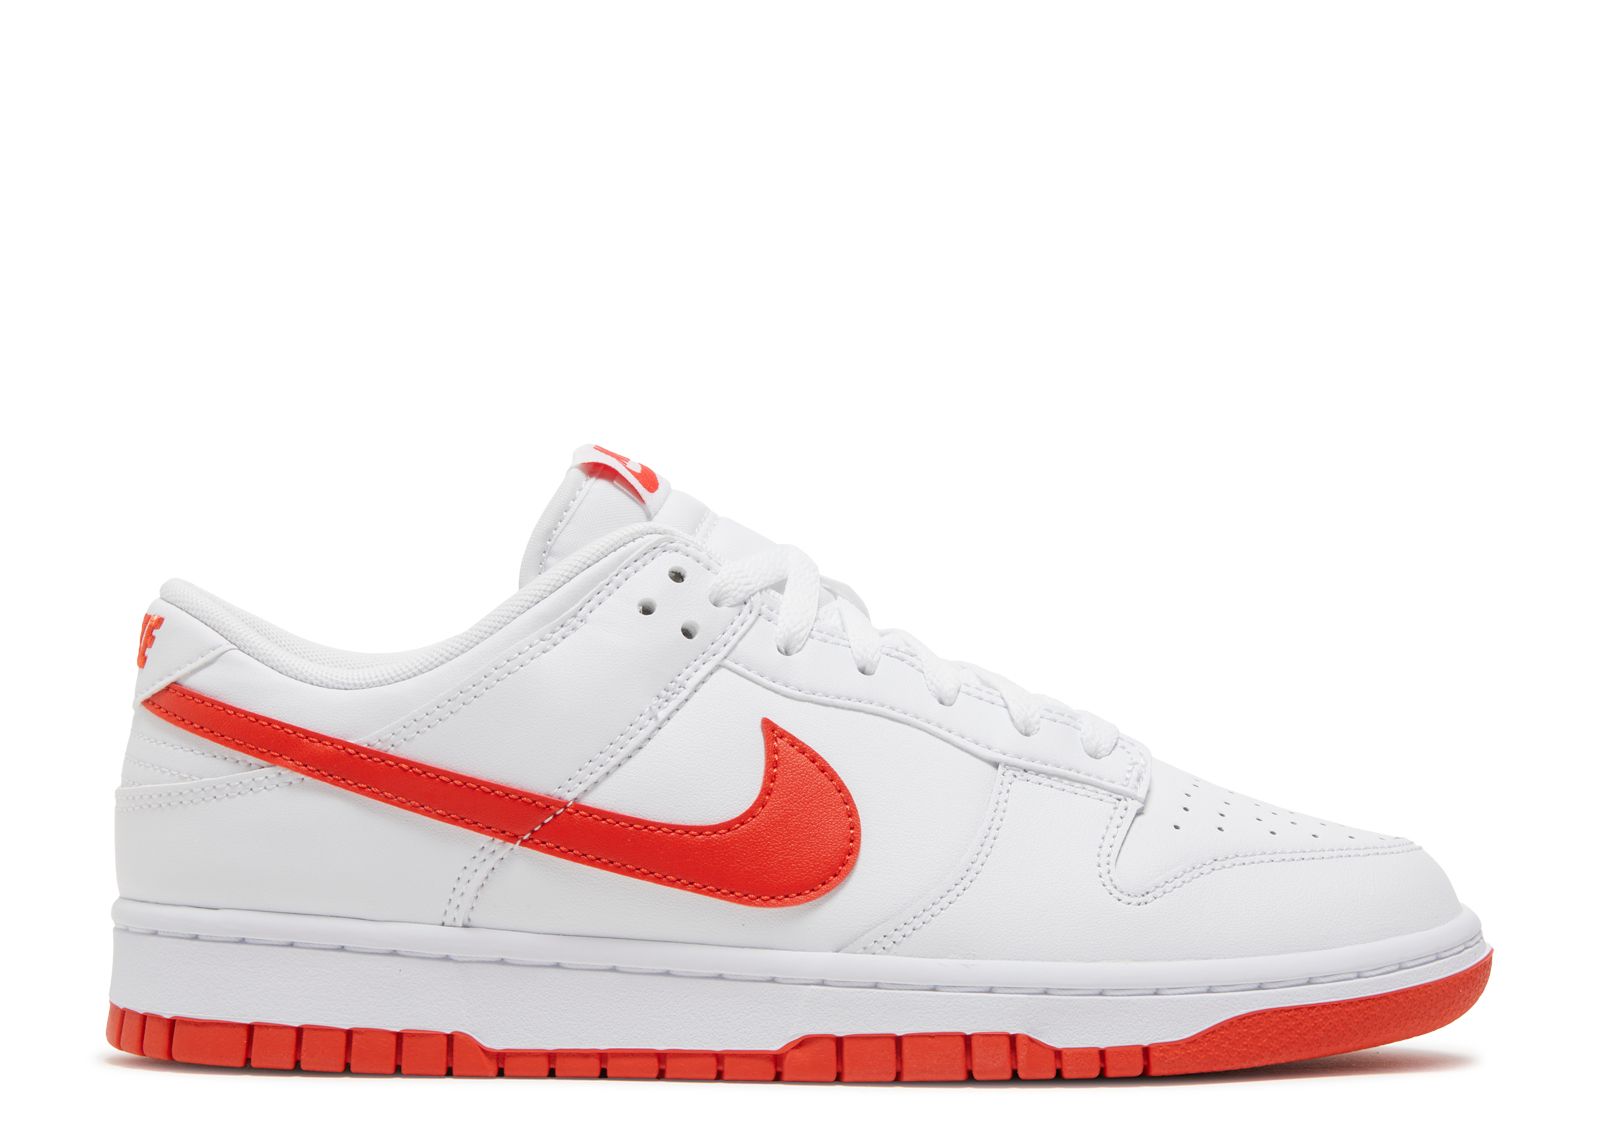 Кроссовки Nike Dunk Low 'Picante Red', белый кроссовки nike dunk low athletic department picante red серый